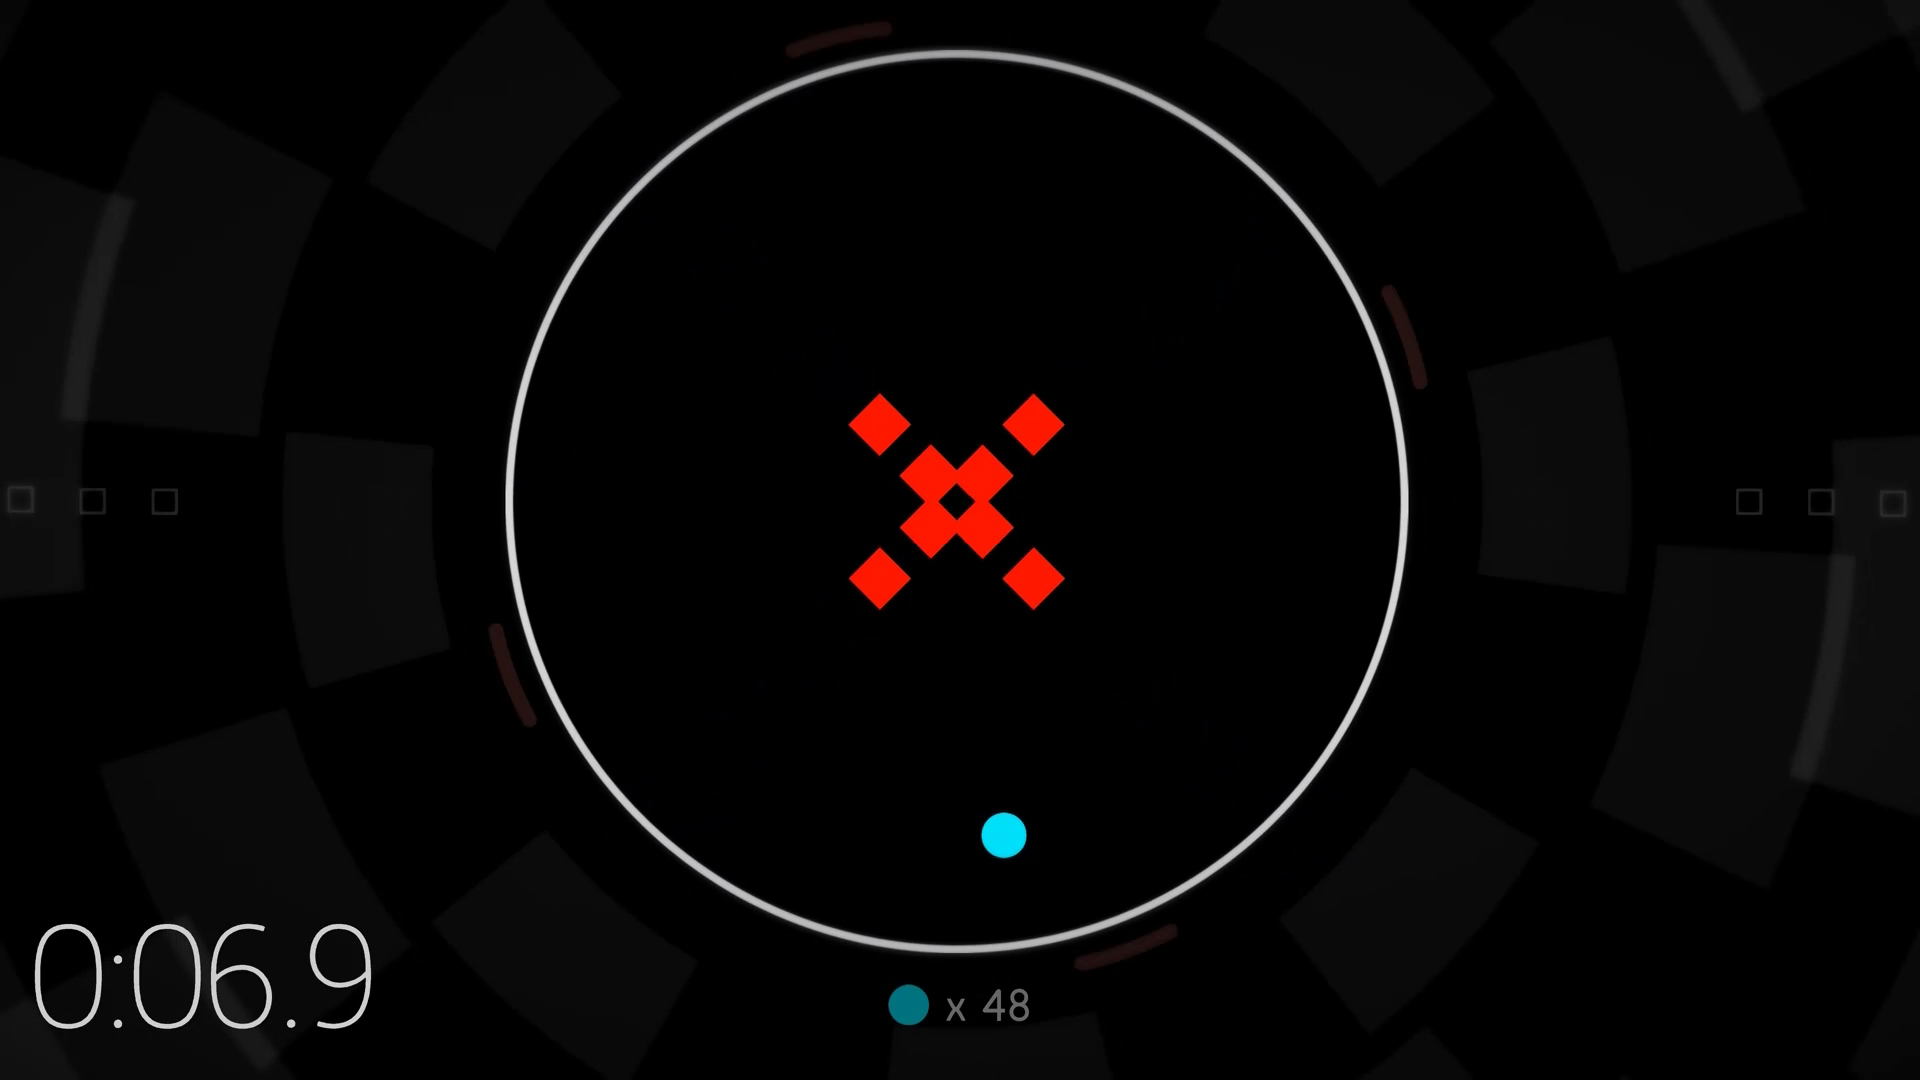 A screenshot from HyperDot. A timer in the bottom-left corner of the screen indicates there are 6.9 seconds left in gameplay.